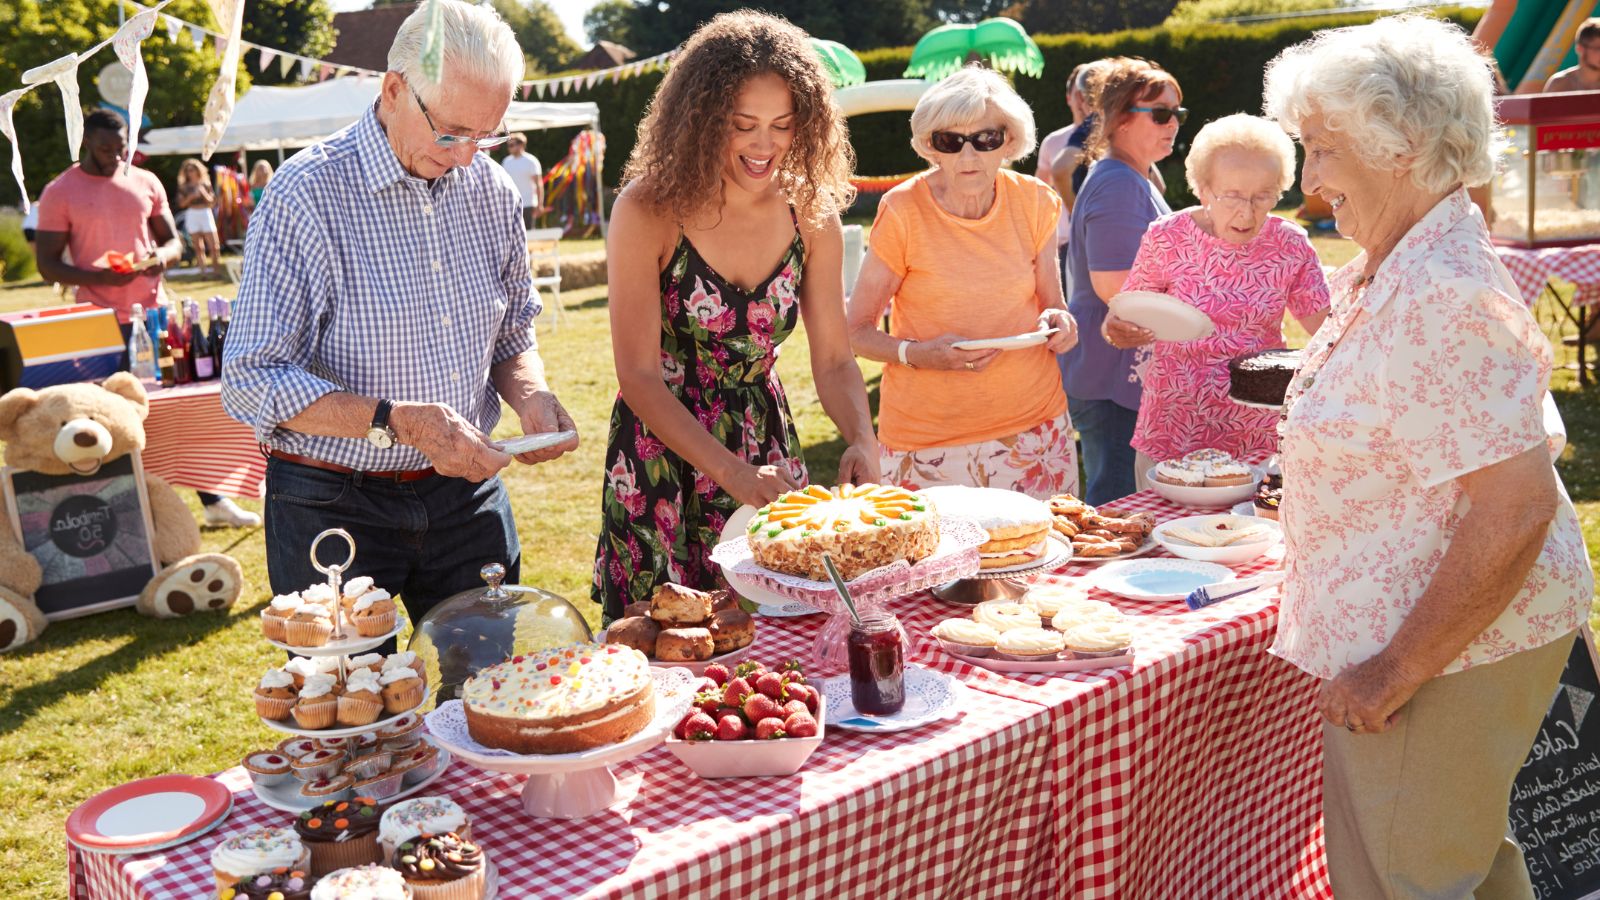 People at a summer fete cake sale